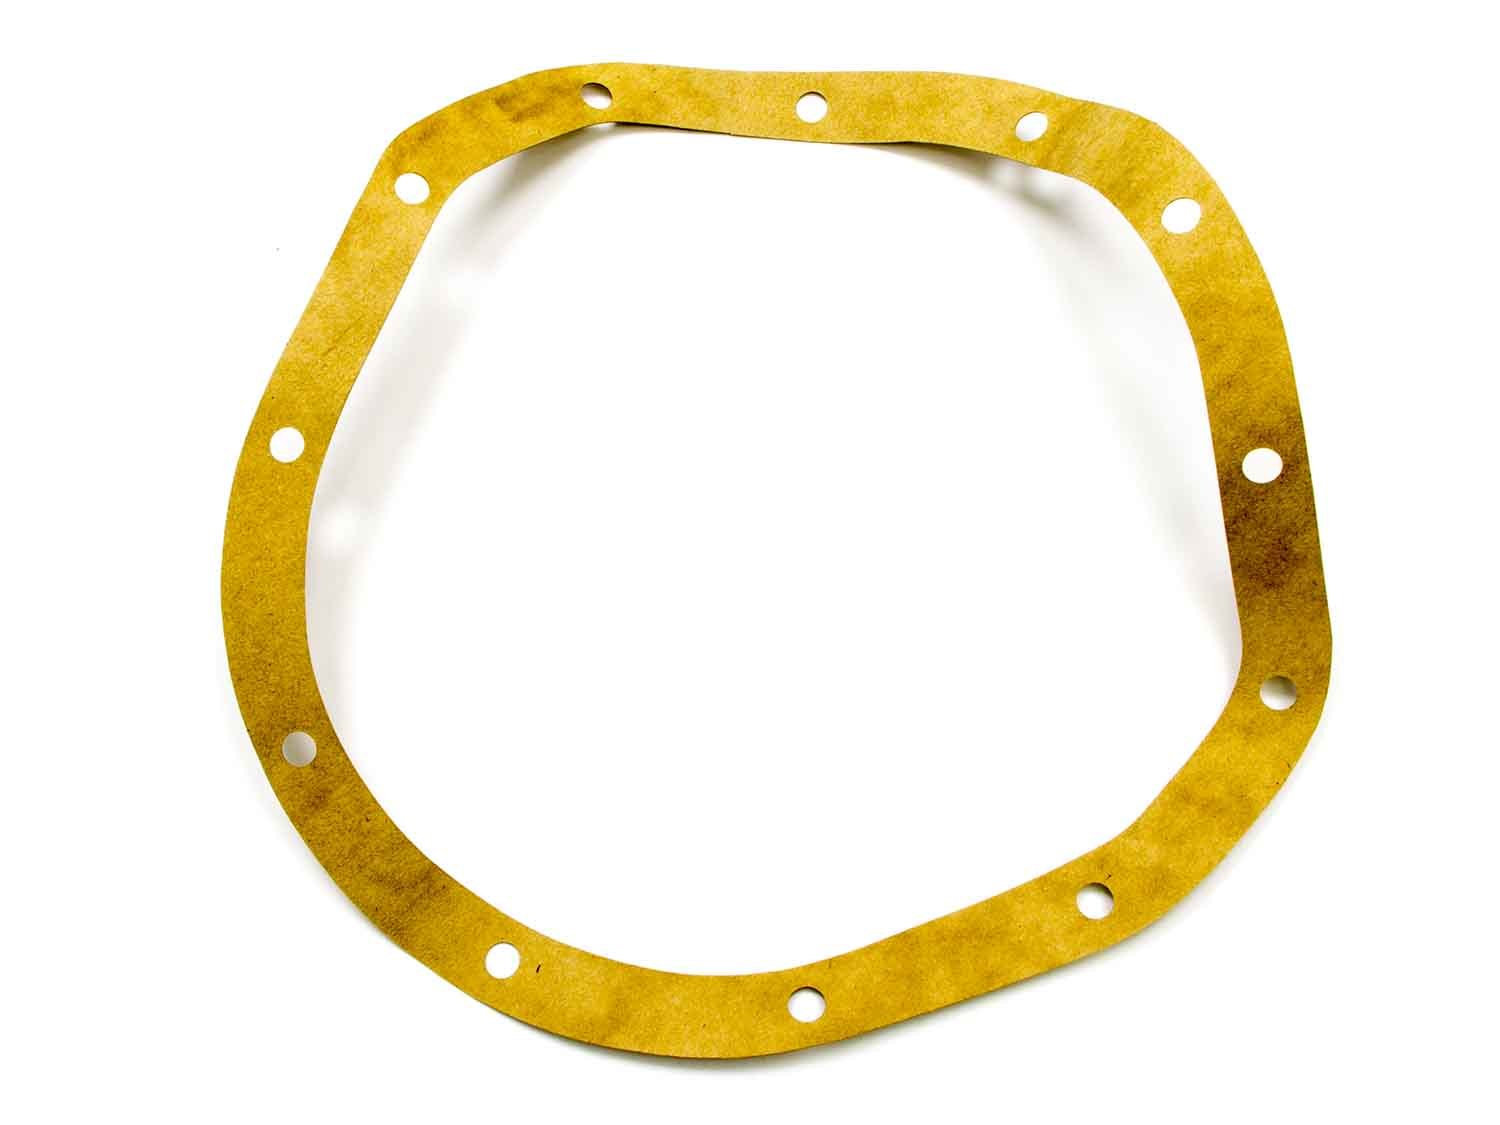 Ratech 5105 - Differential Cover Gasket, Paper, Truck, GM 12-Bolt, Each